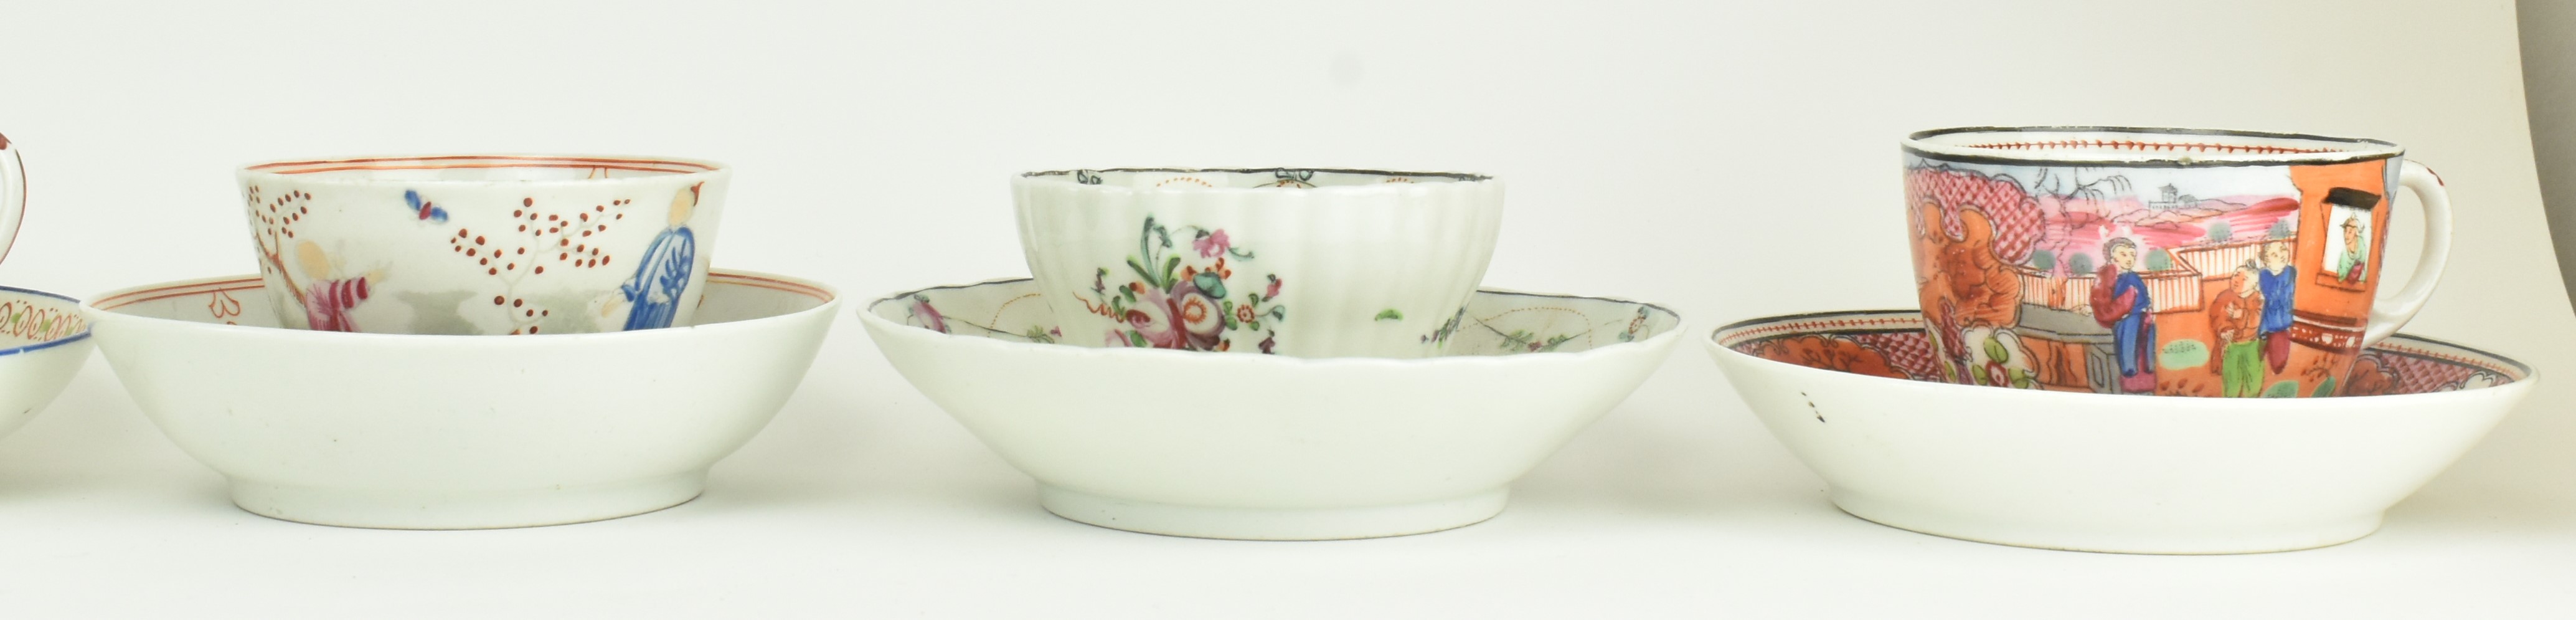 GROUP OF 18TH CENTURY NEWHALL PORCELAIN CUPS AND SAUCERS - Image 5 of 7